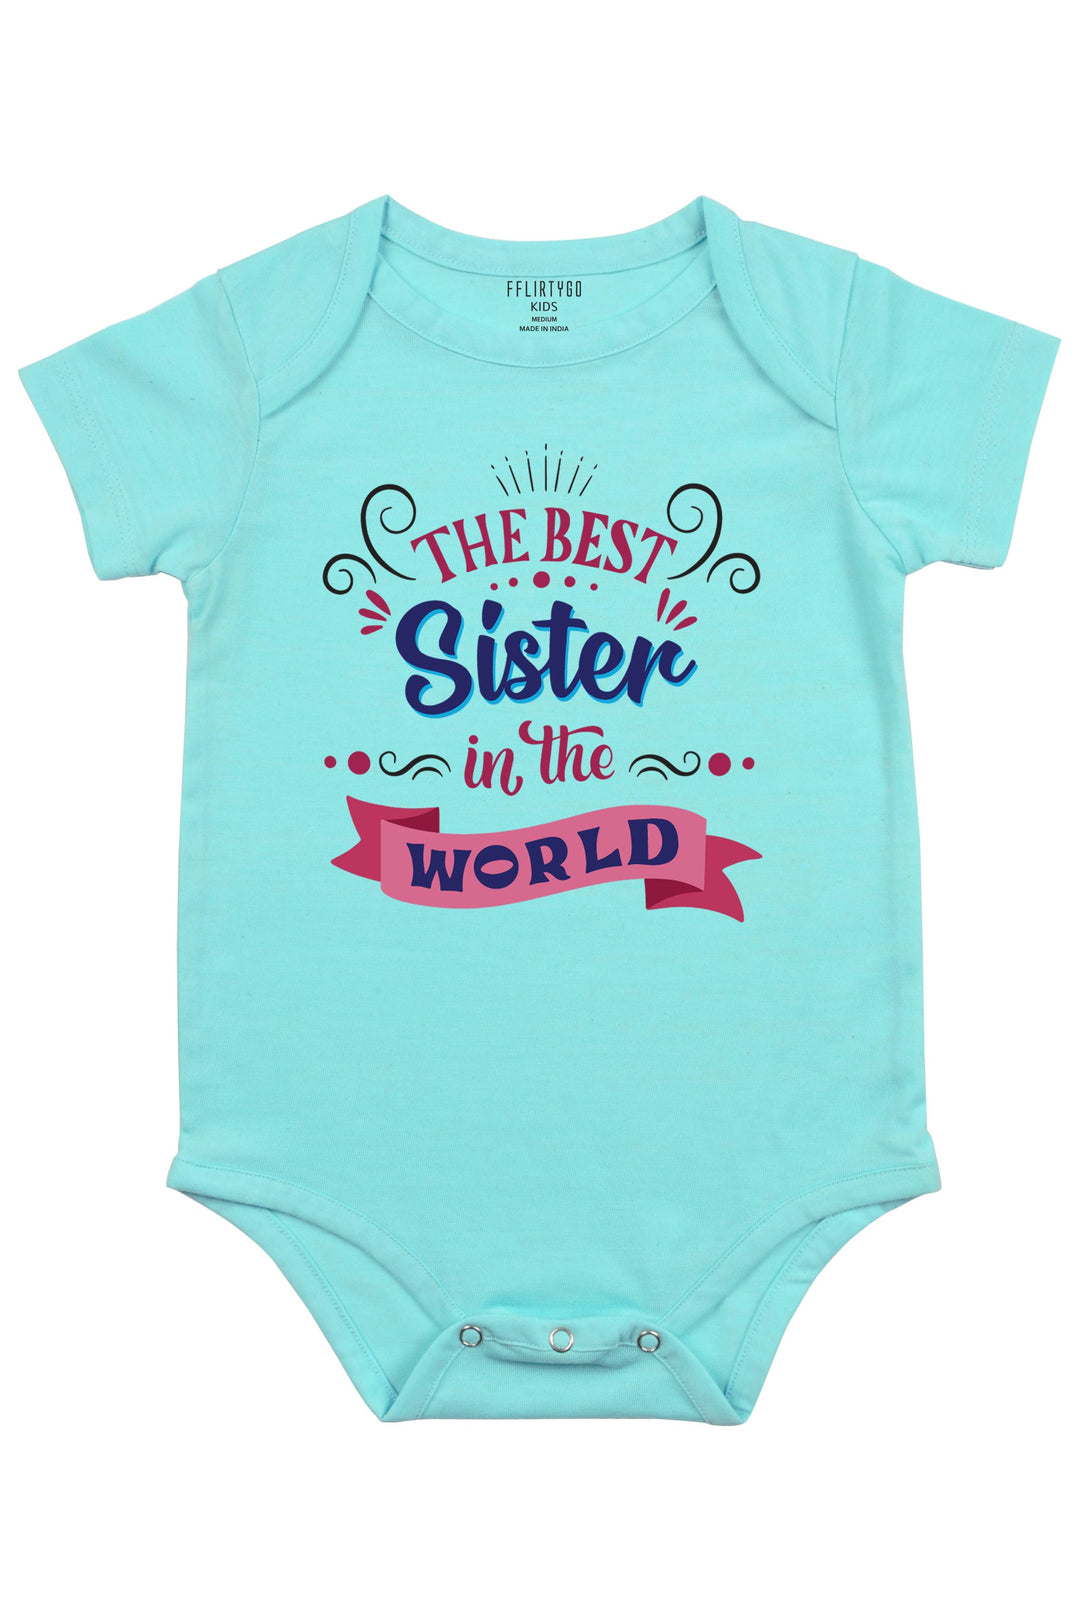 The Best Sister In The World Baby Romper | Onesies